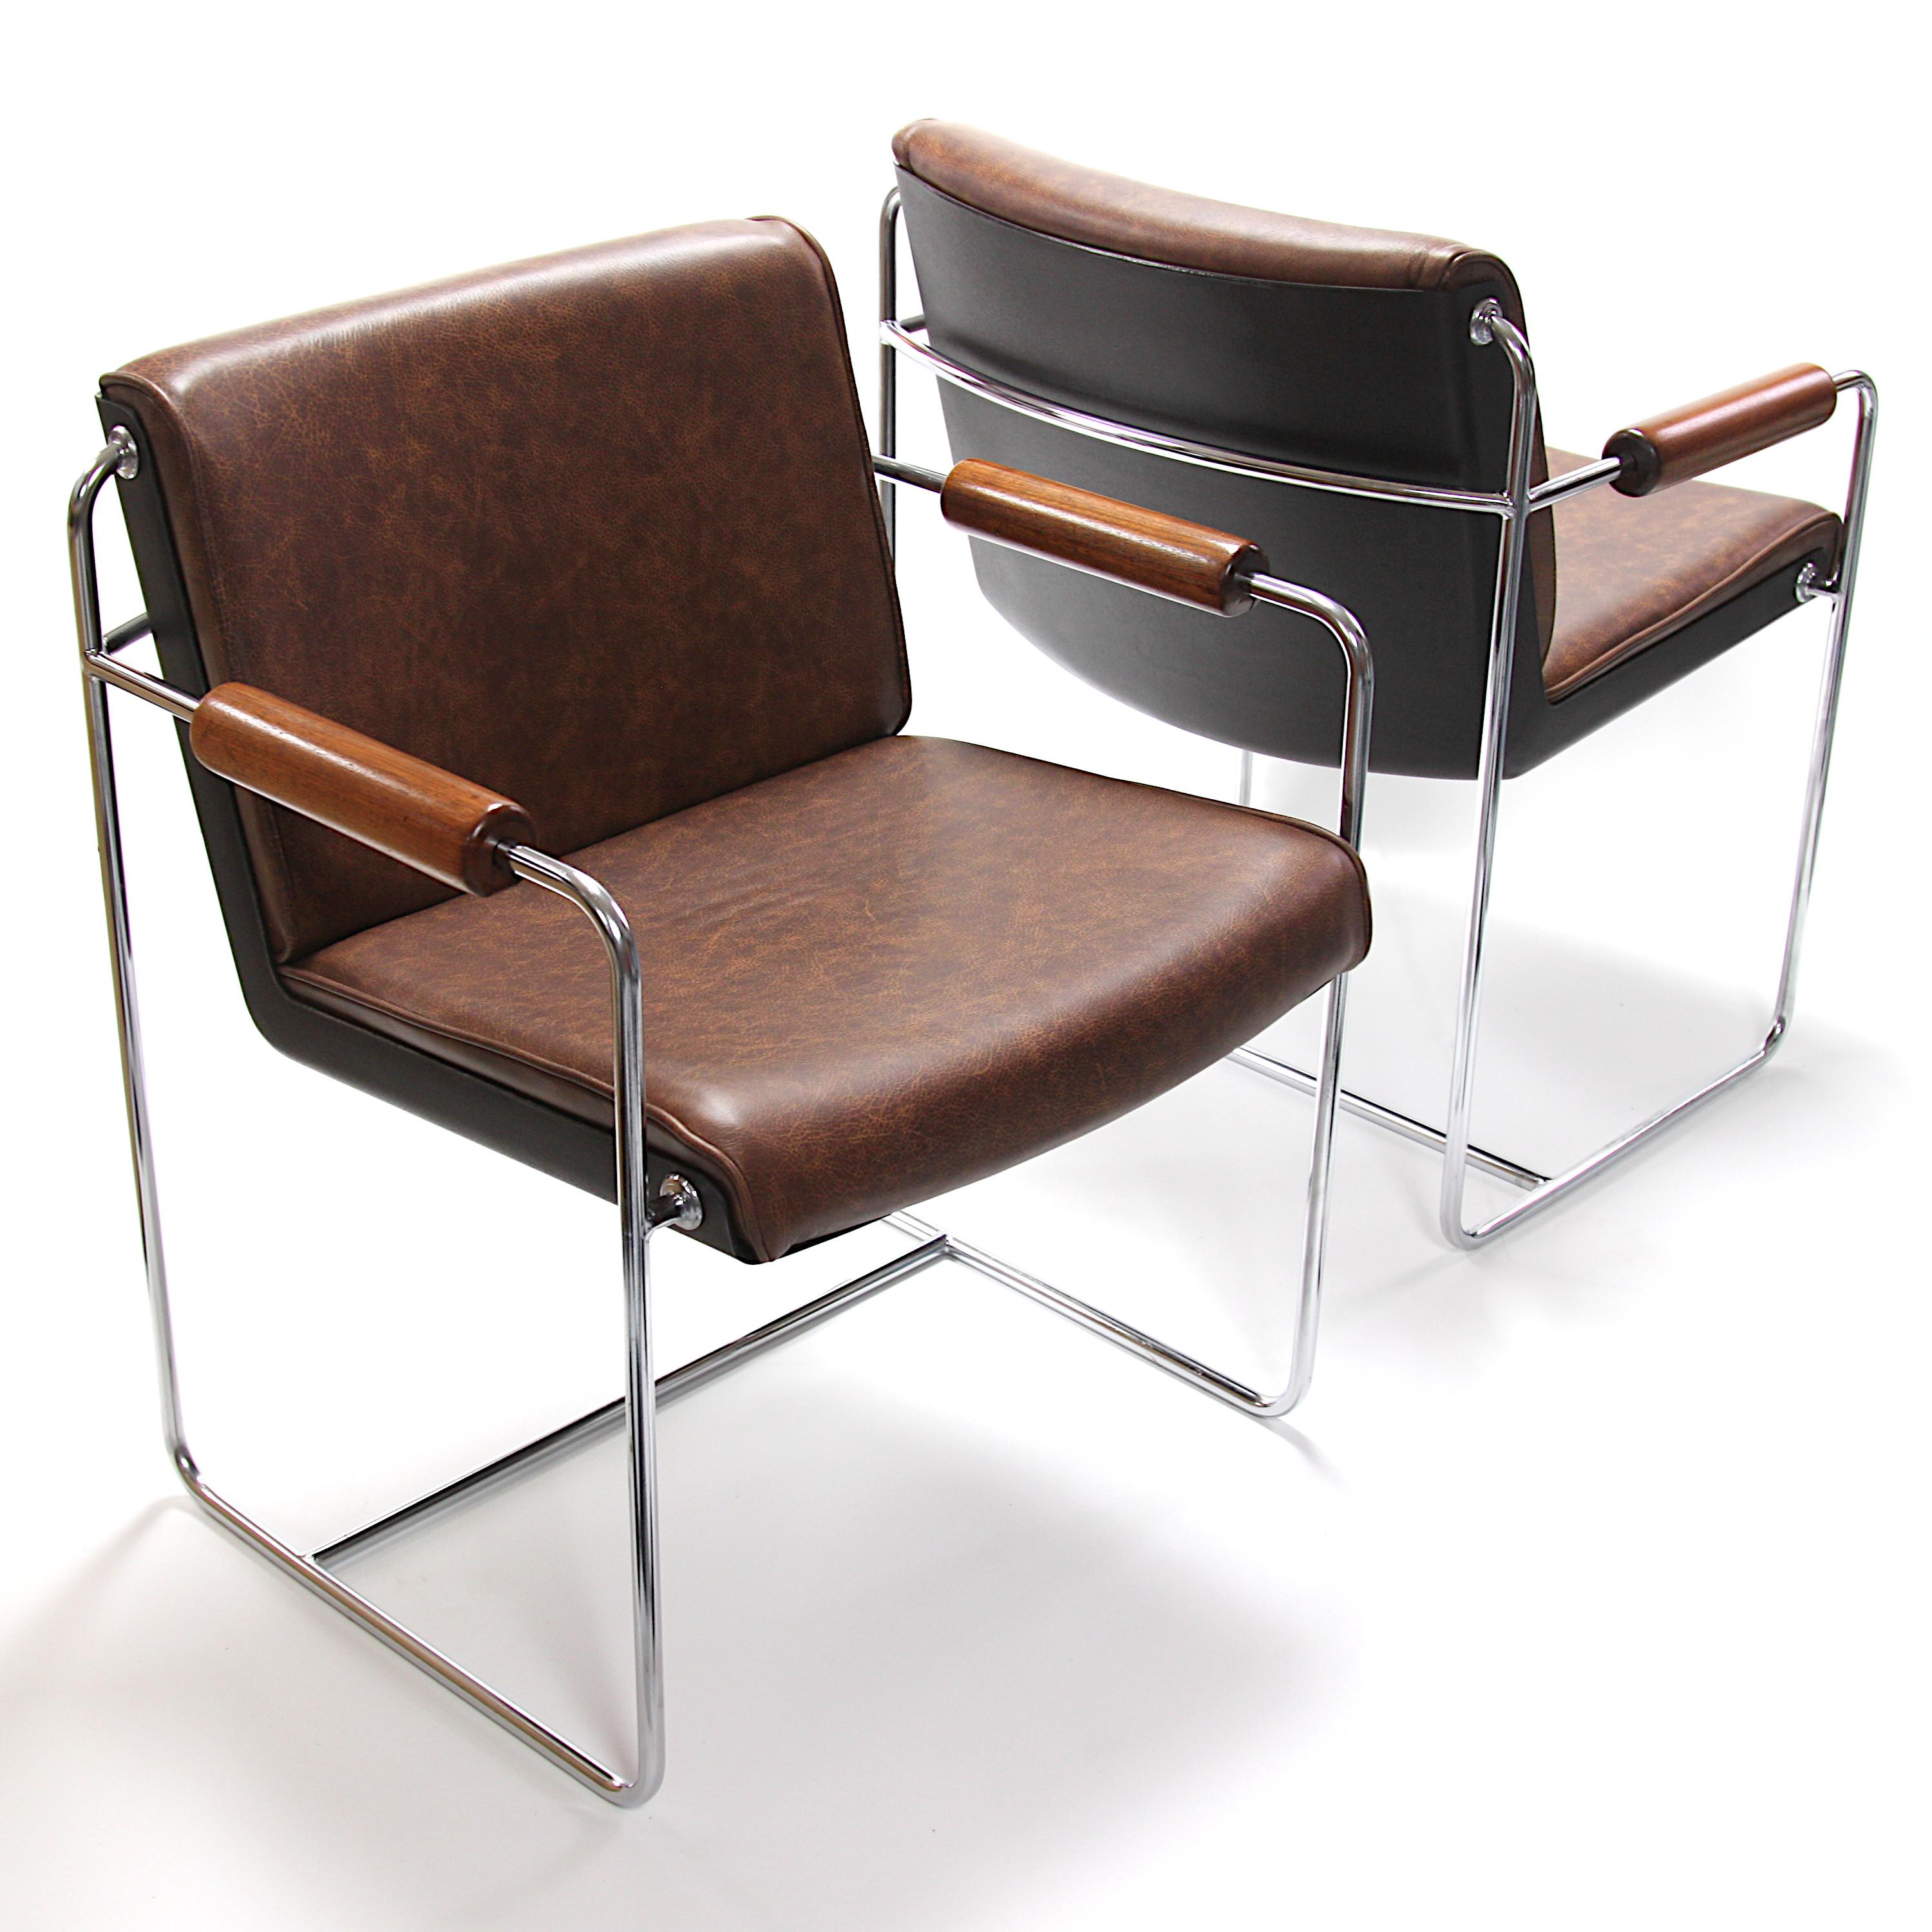 Wonderful pair of rare 1960s AFKA guest/side chairs by Krueger metal products. These chairs feature a white fiberglass shell, chrome steel frame and solid walnut armrests. Chairs have been freshly restored and now feature gorgeous distressed leather